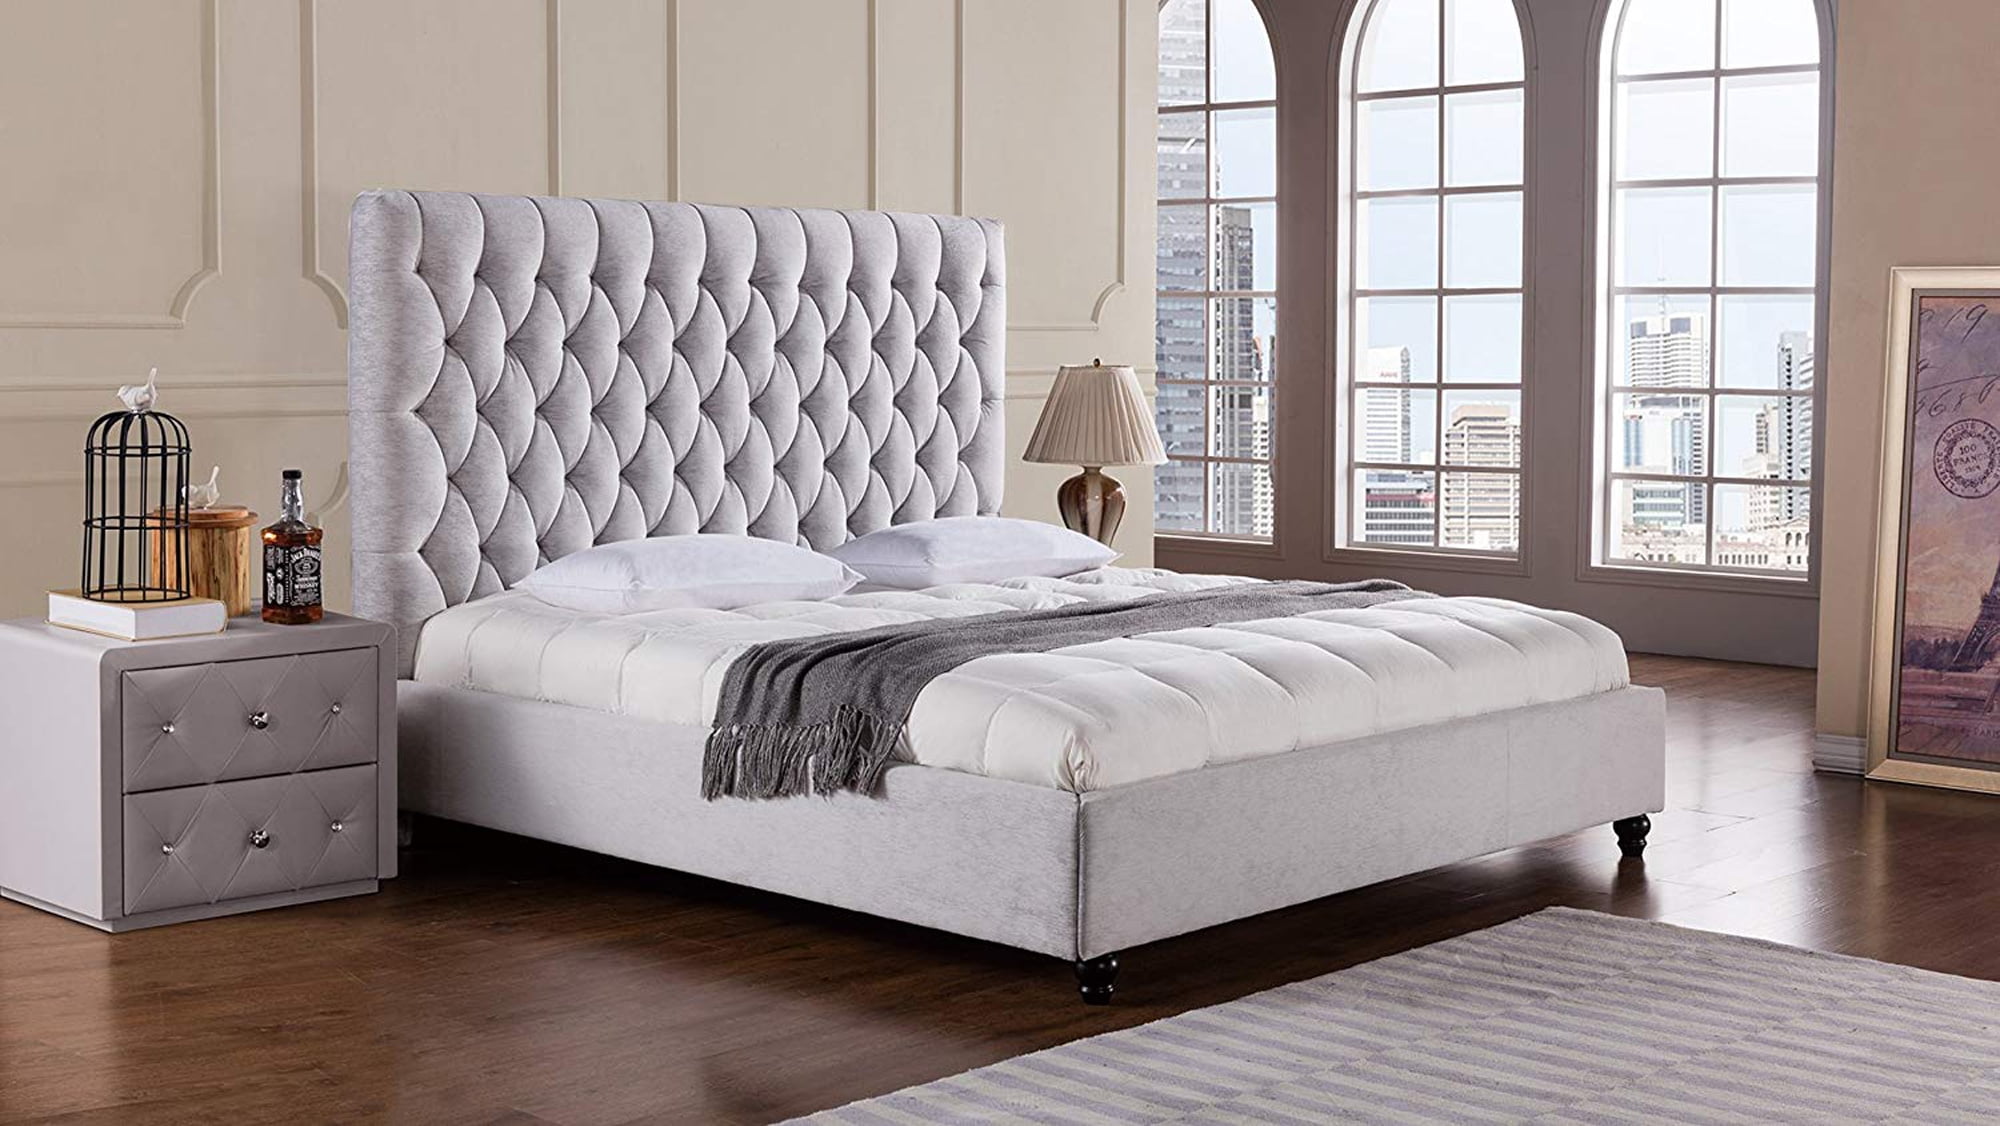 King Bed Gray : Modern Contemporary Urban Design Bedroom King Size